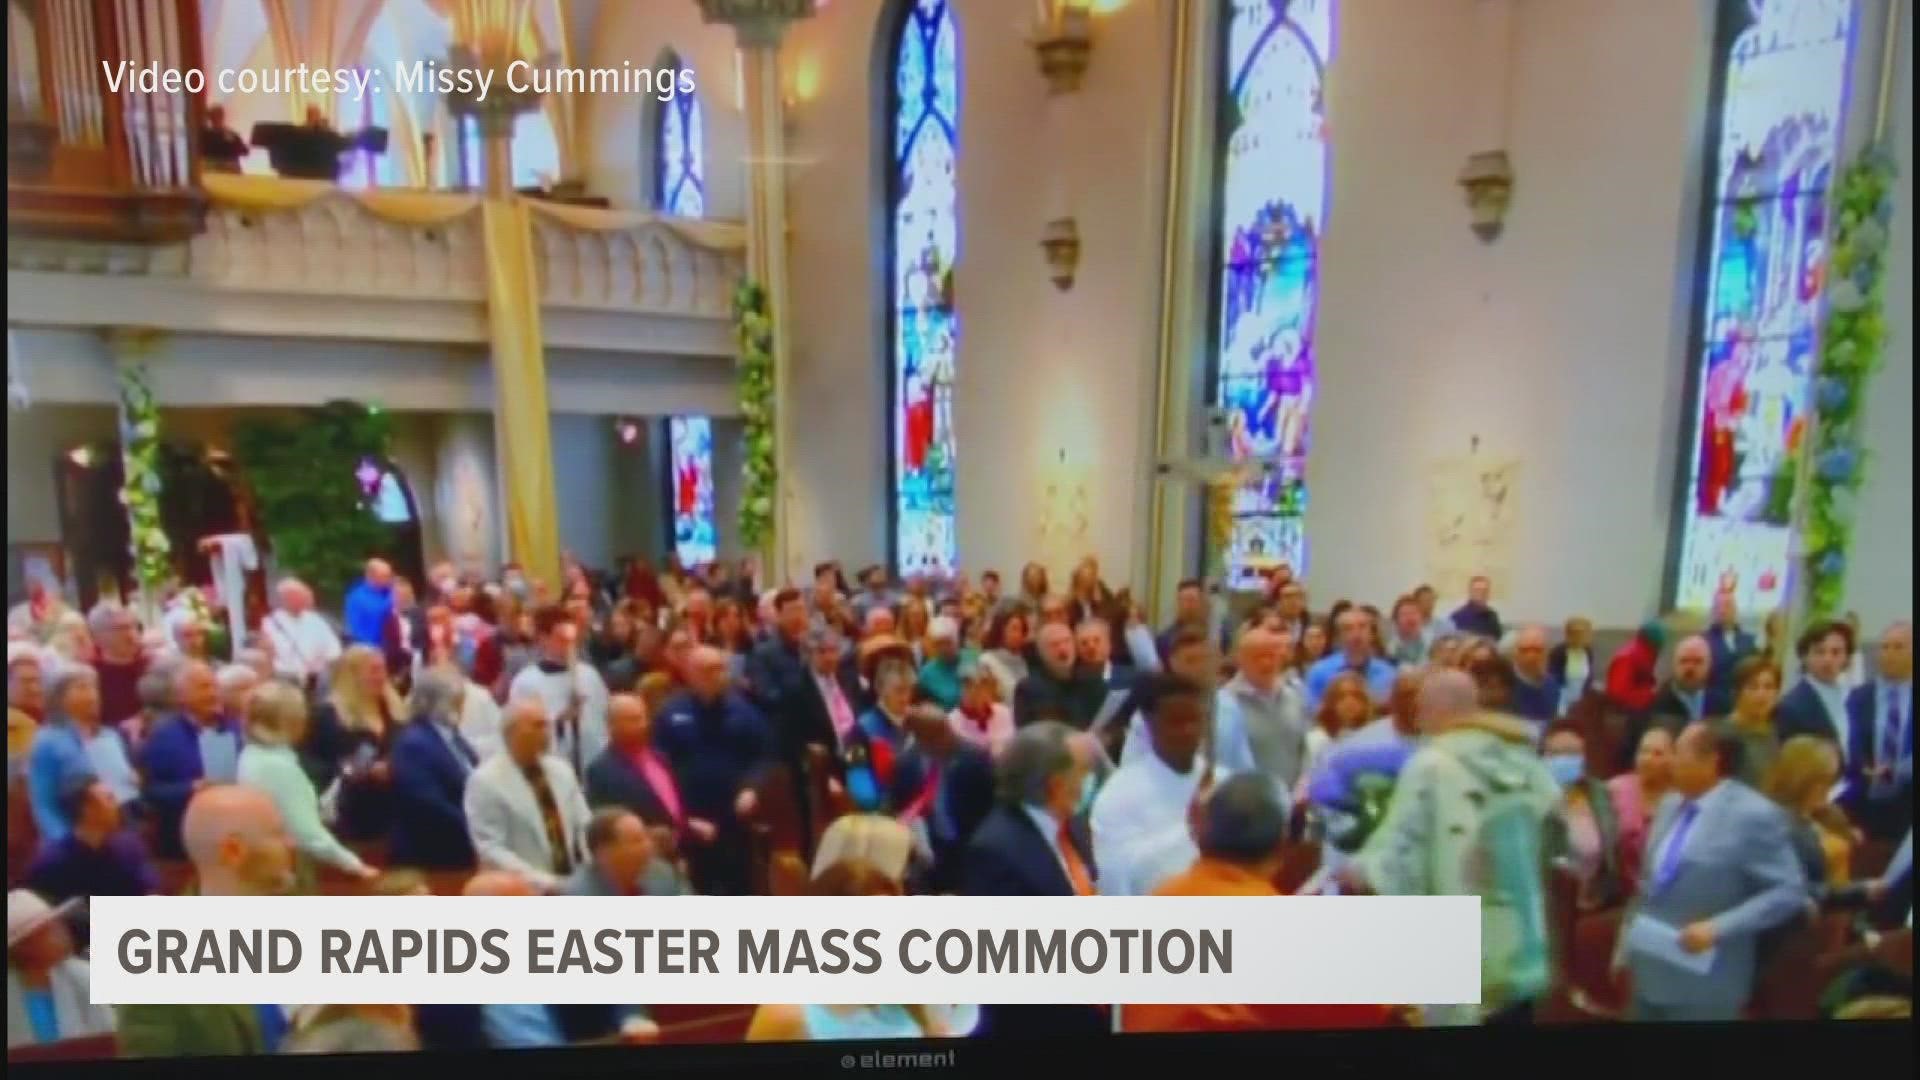 Sunday morning, a livestream of the Cathedral of St. Andrew in Grand Rapids showed a man causing a commotion at the altar.